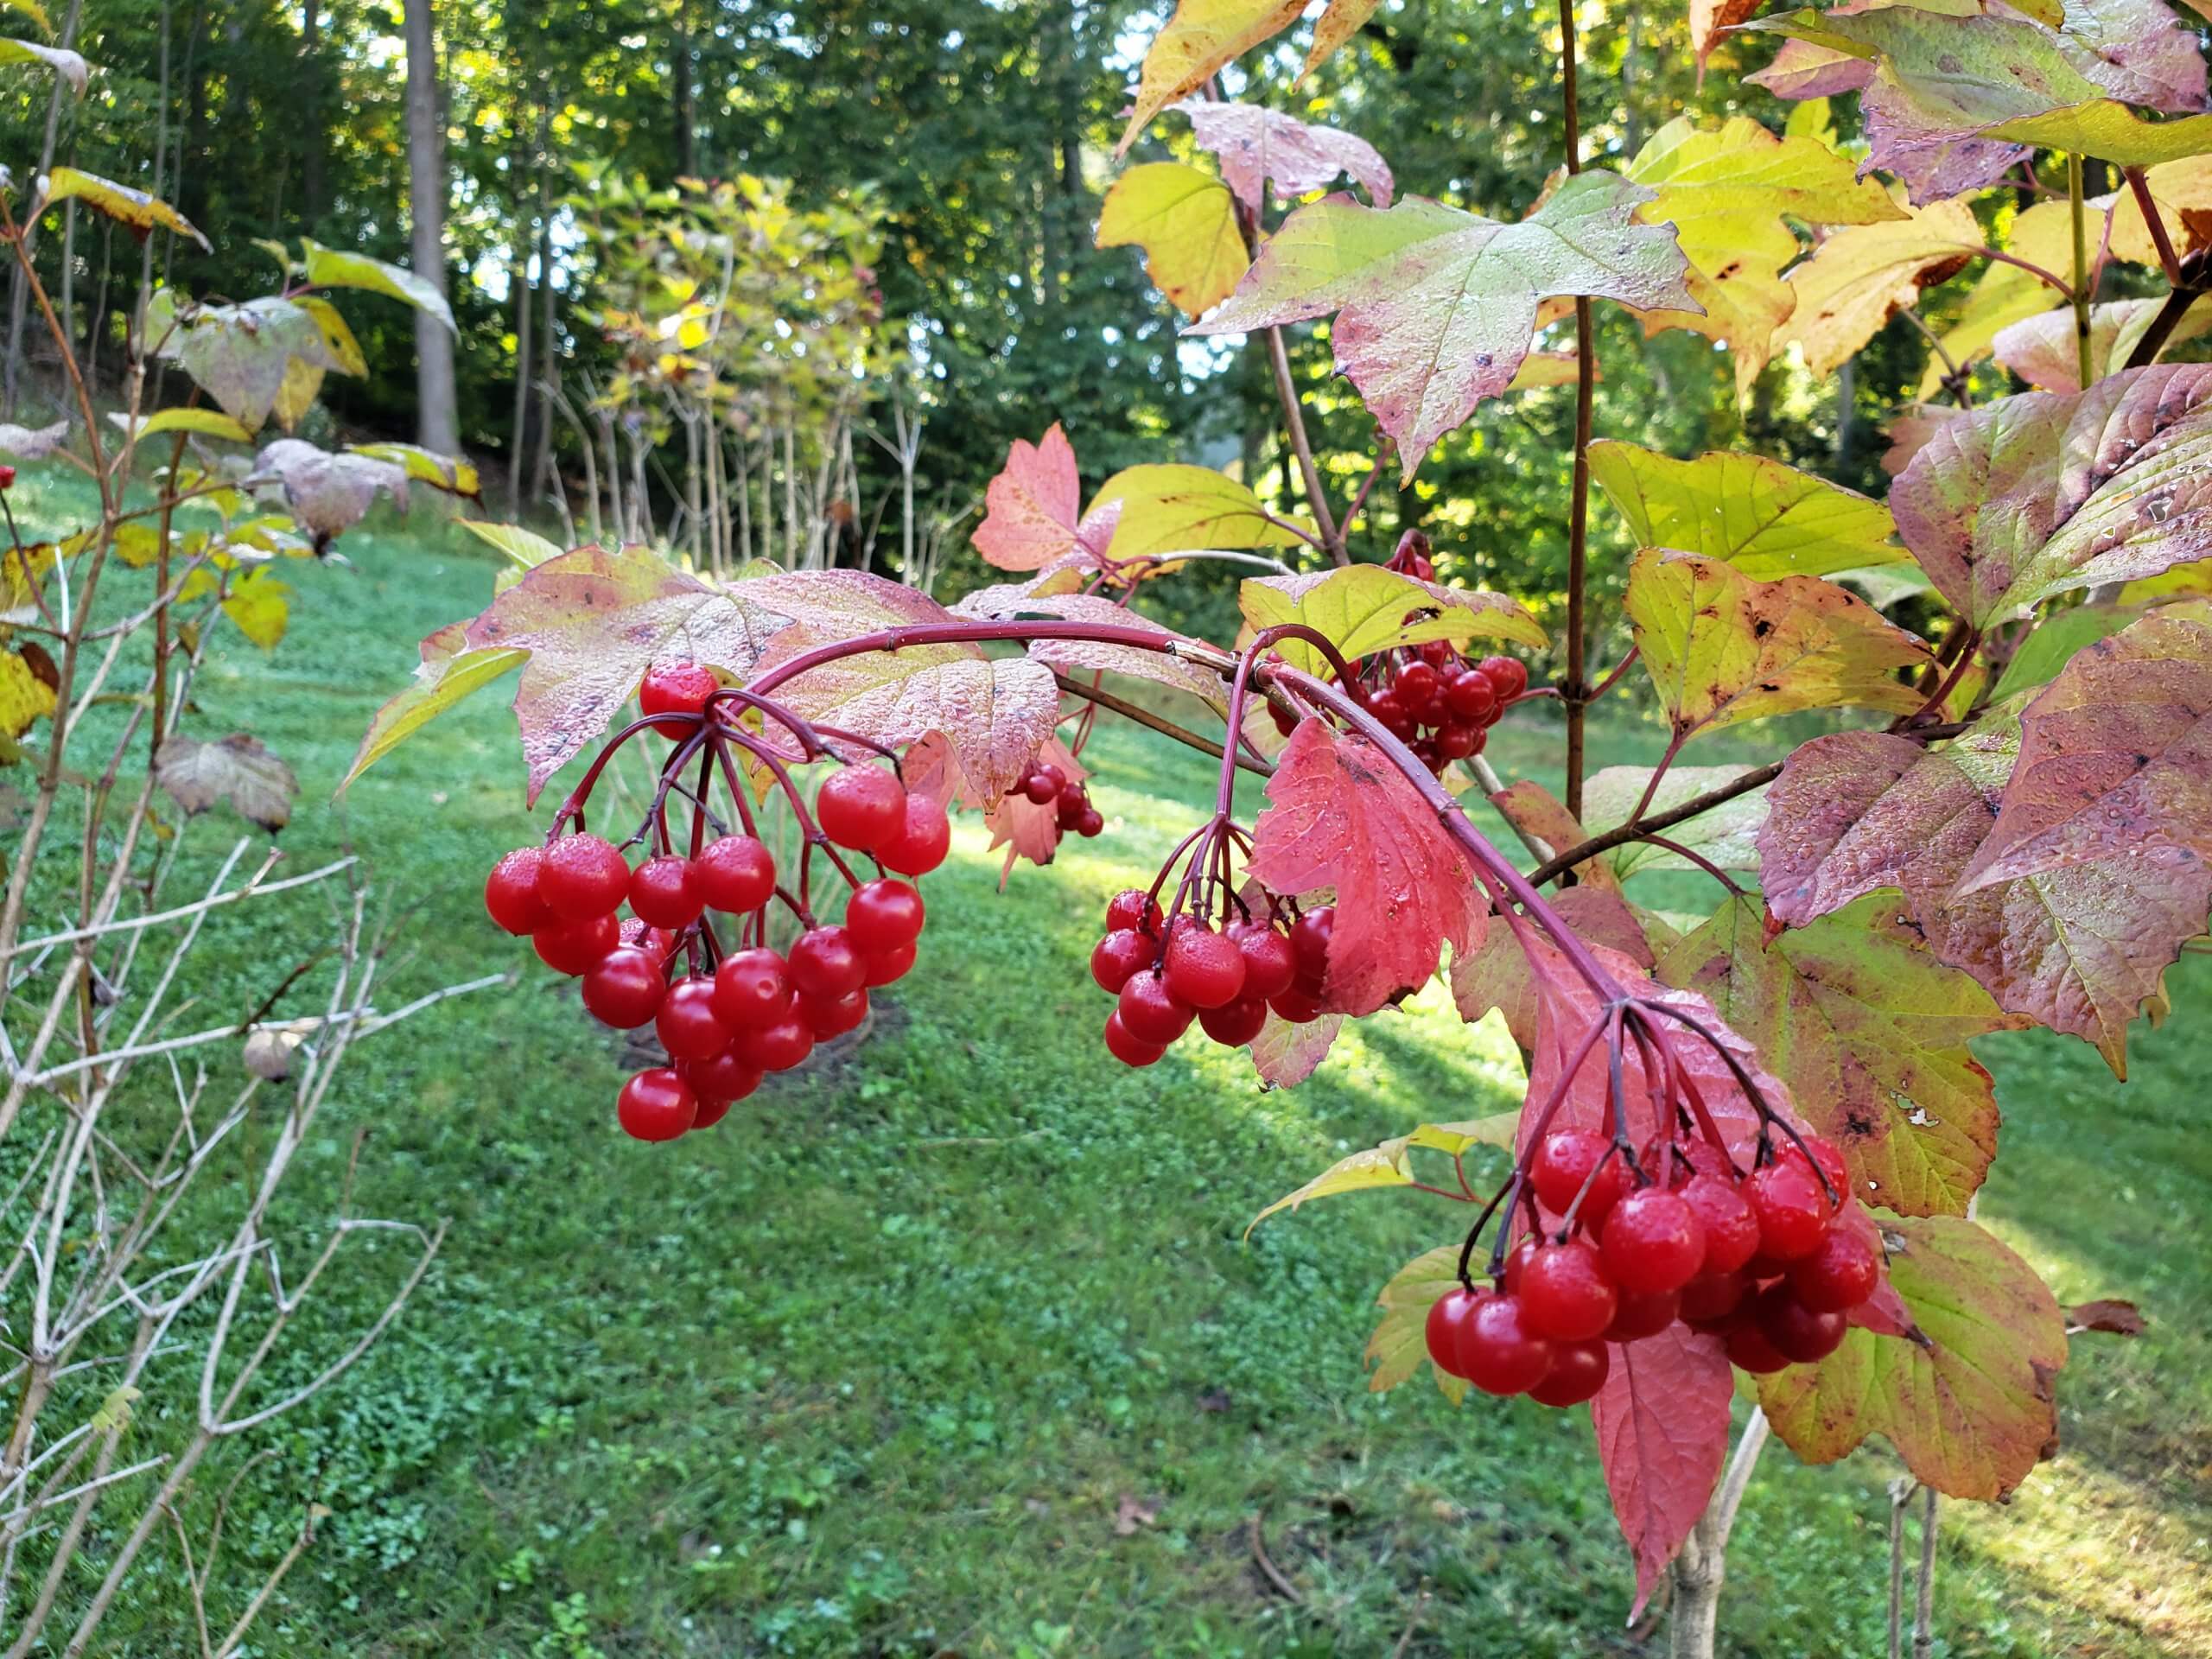 Leaves are setting to turn red as autumn approaches. Cluster of ruby red berries sit in the foreground.